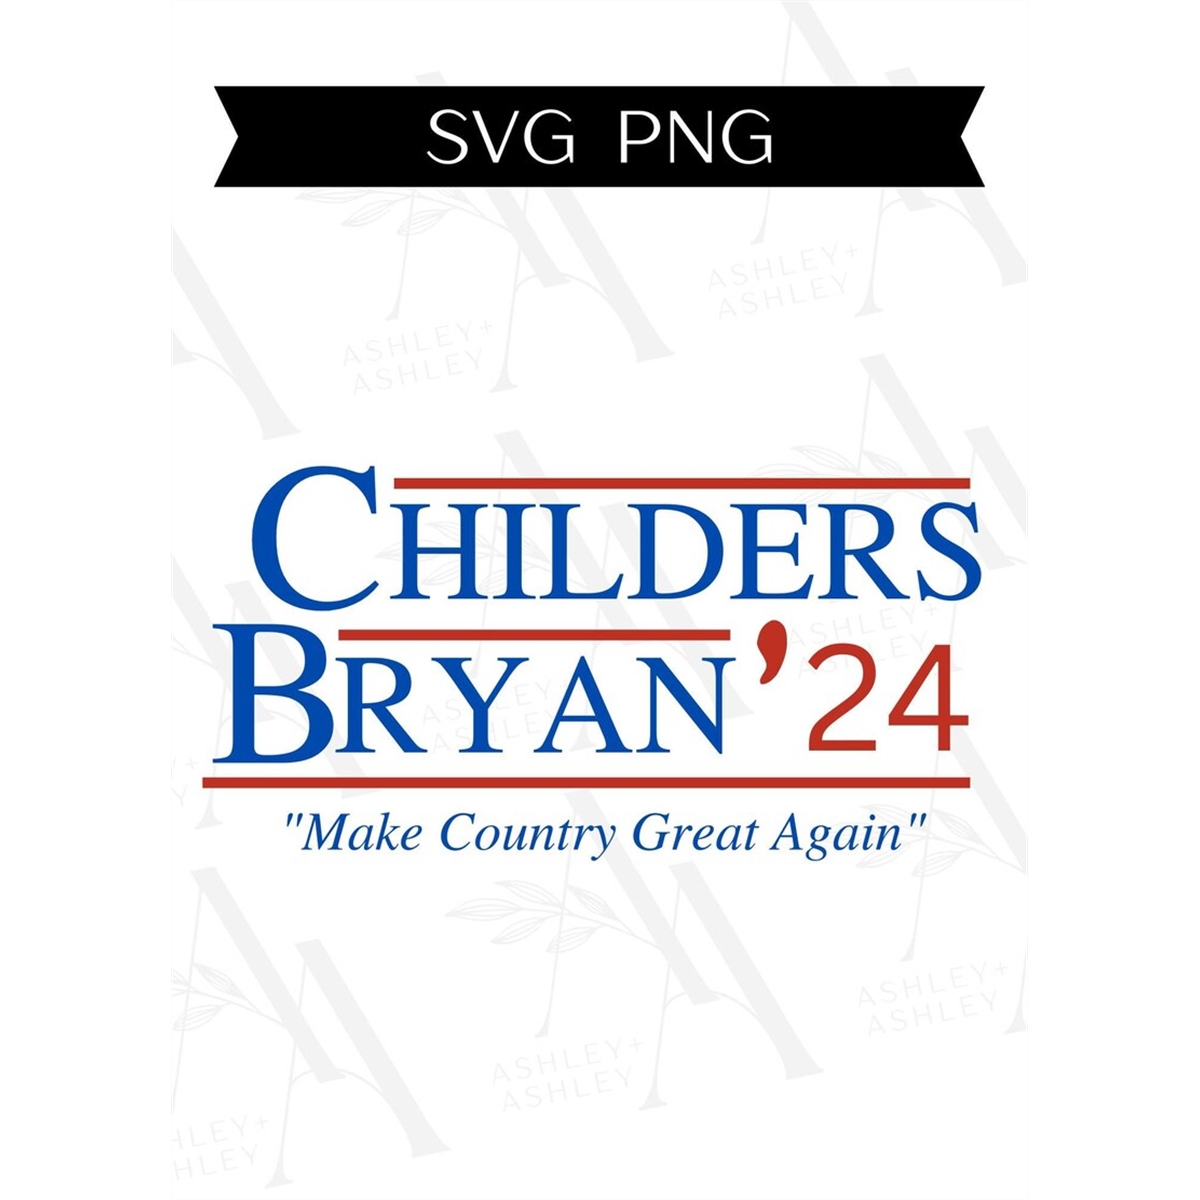 childers-bryan-24-svg-png-make-country-great-again-svg-image-1